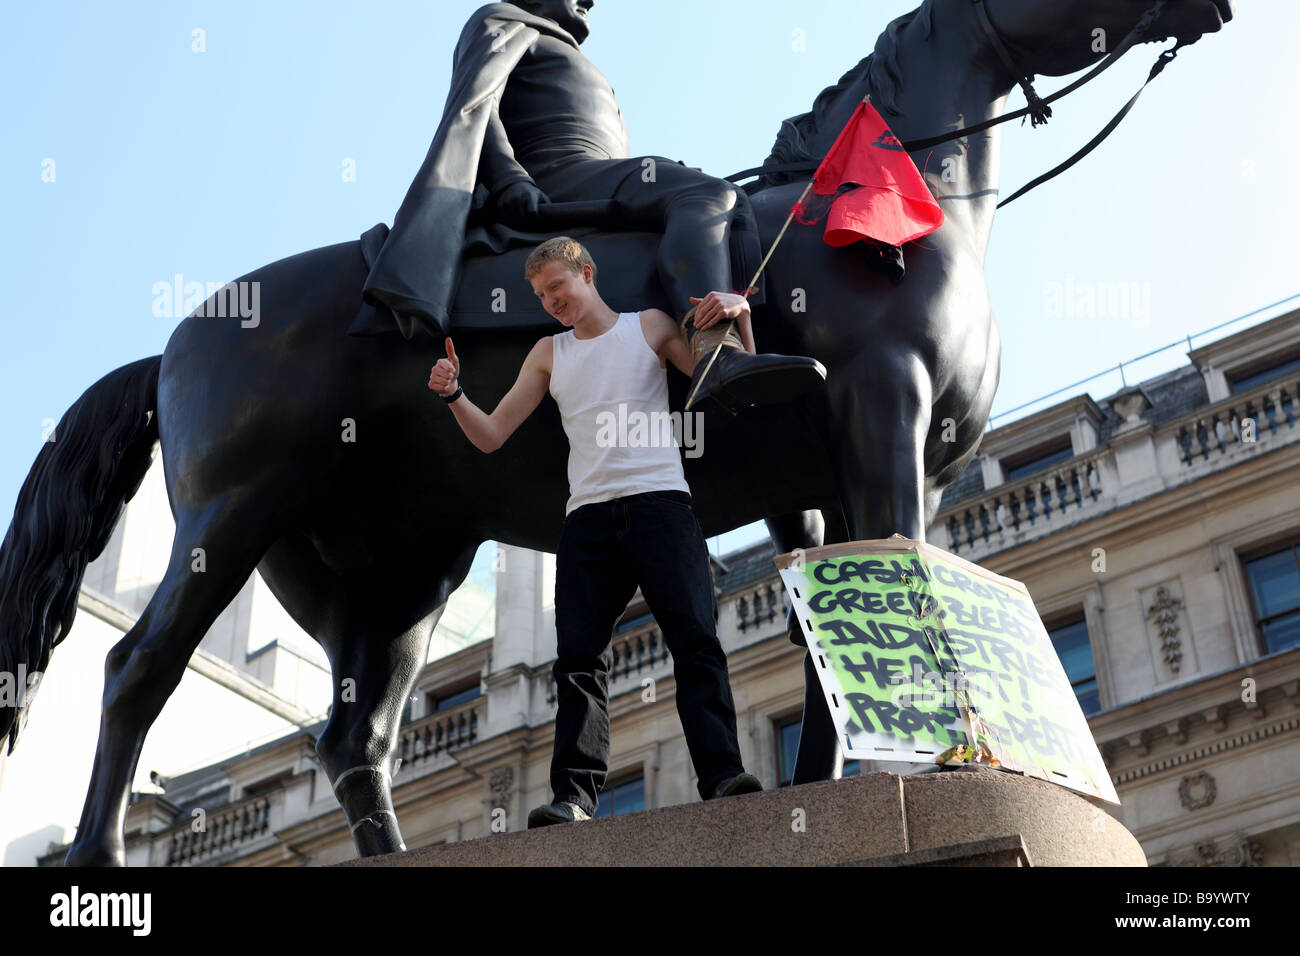 Protester on statue outside the Bank of England during the 2009 G20 summit, London, UK. Stock Photo